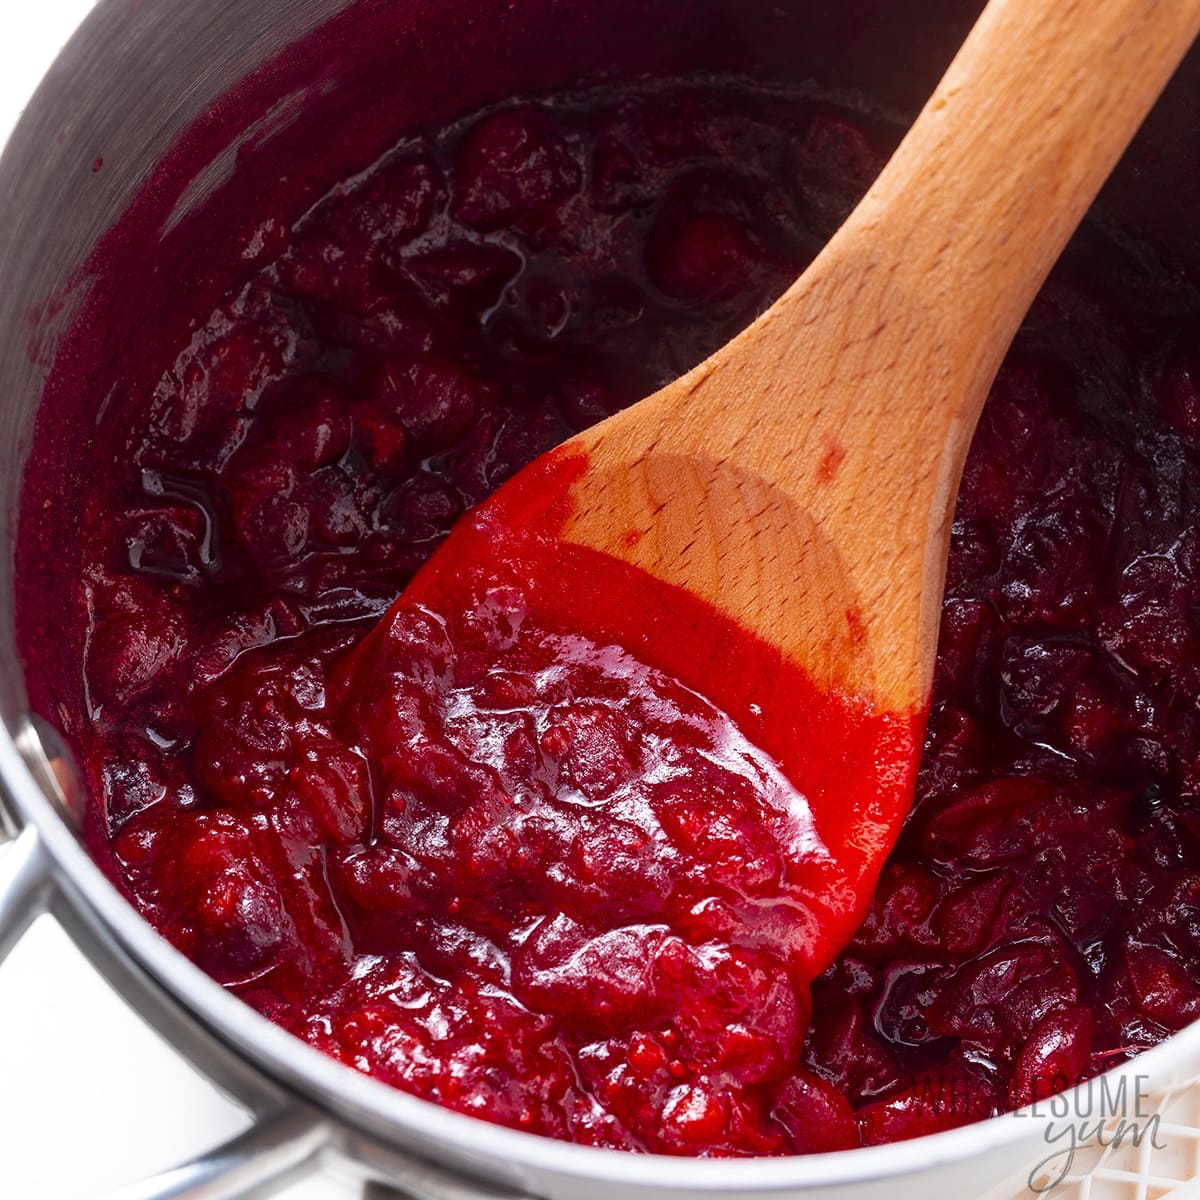 Keto cranberry sauce with wooden spoon.